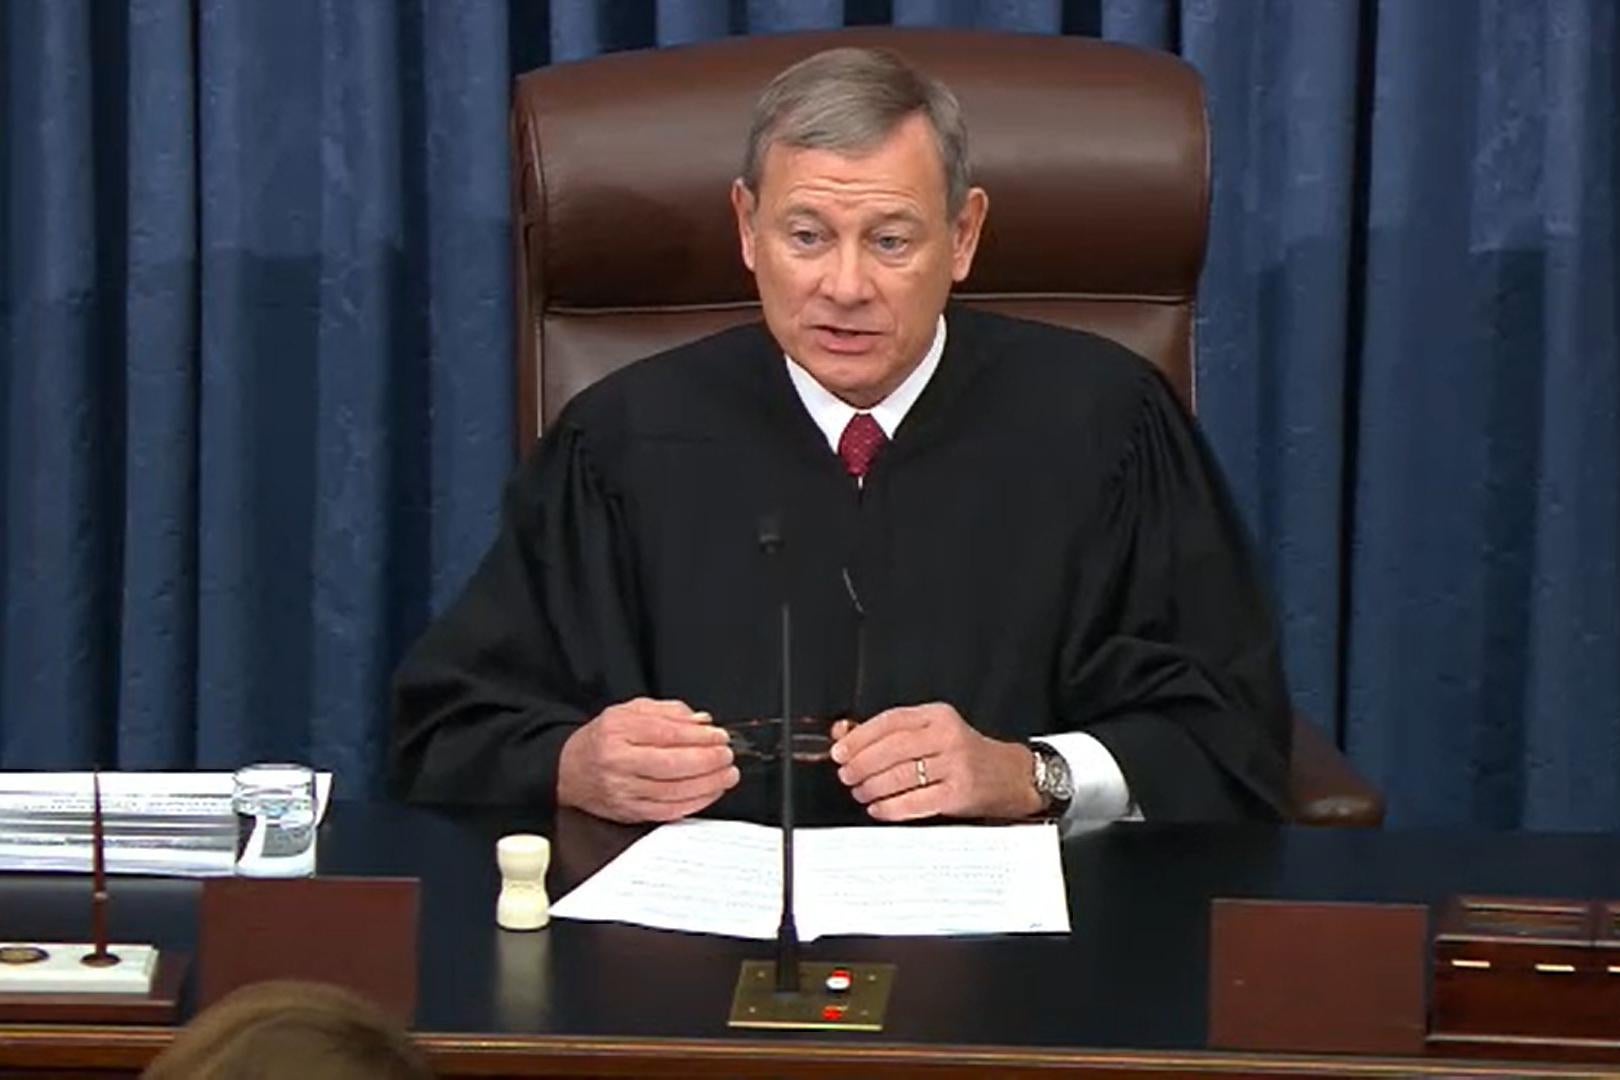 John Roberts in his robes, seated and addressing the Senate.